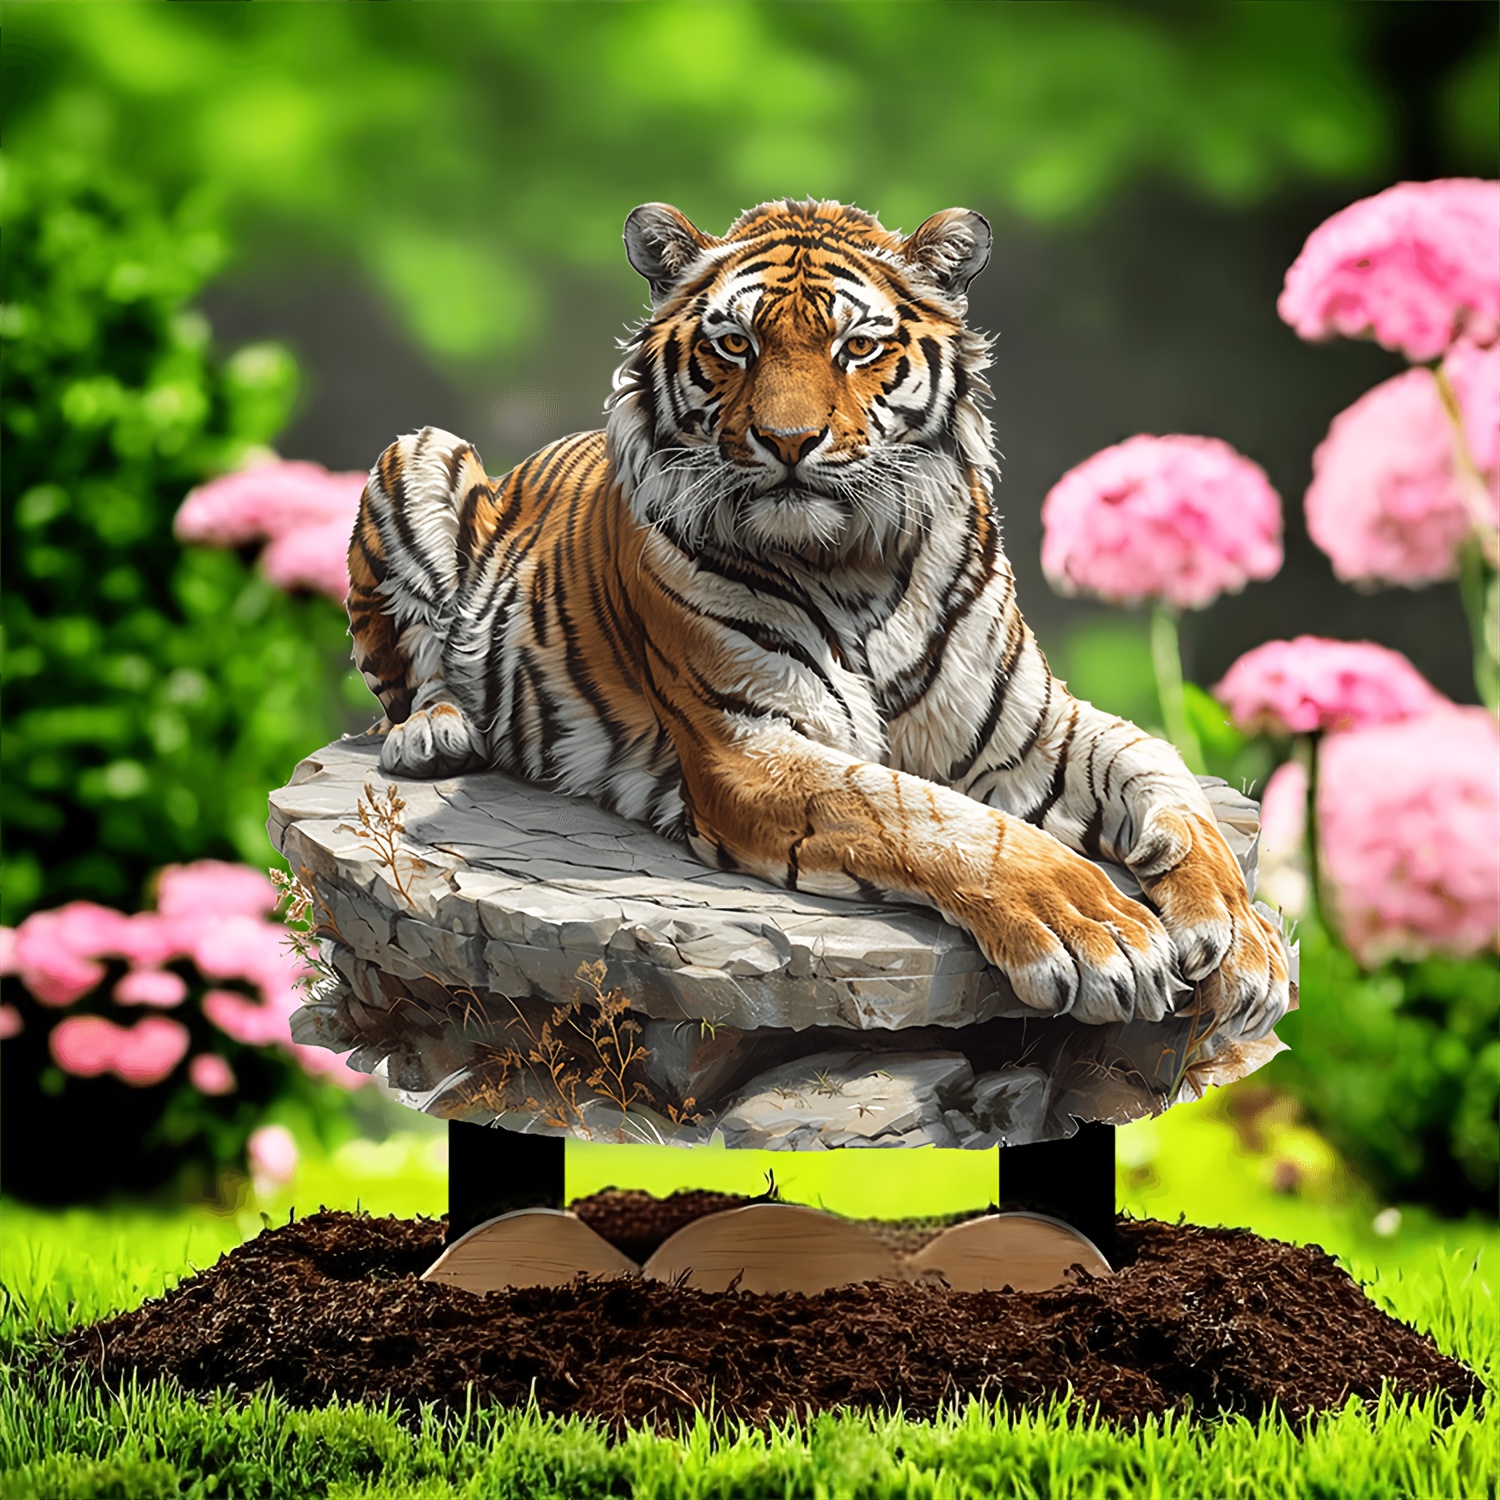 

Tiger Figurine Garden Stake Acrylic Suncatchers For Birthday, Animal Theme Outdoor Decor Art, Pot & Landscape Accent, Gift For Plant Enthusiasts (pack Of 1)